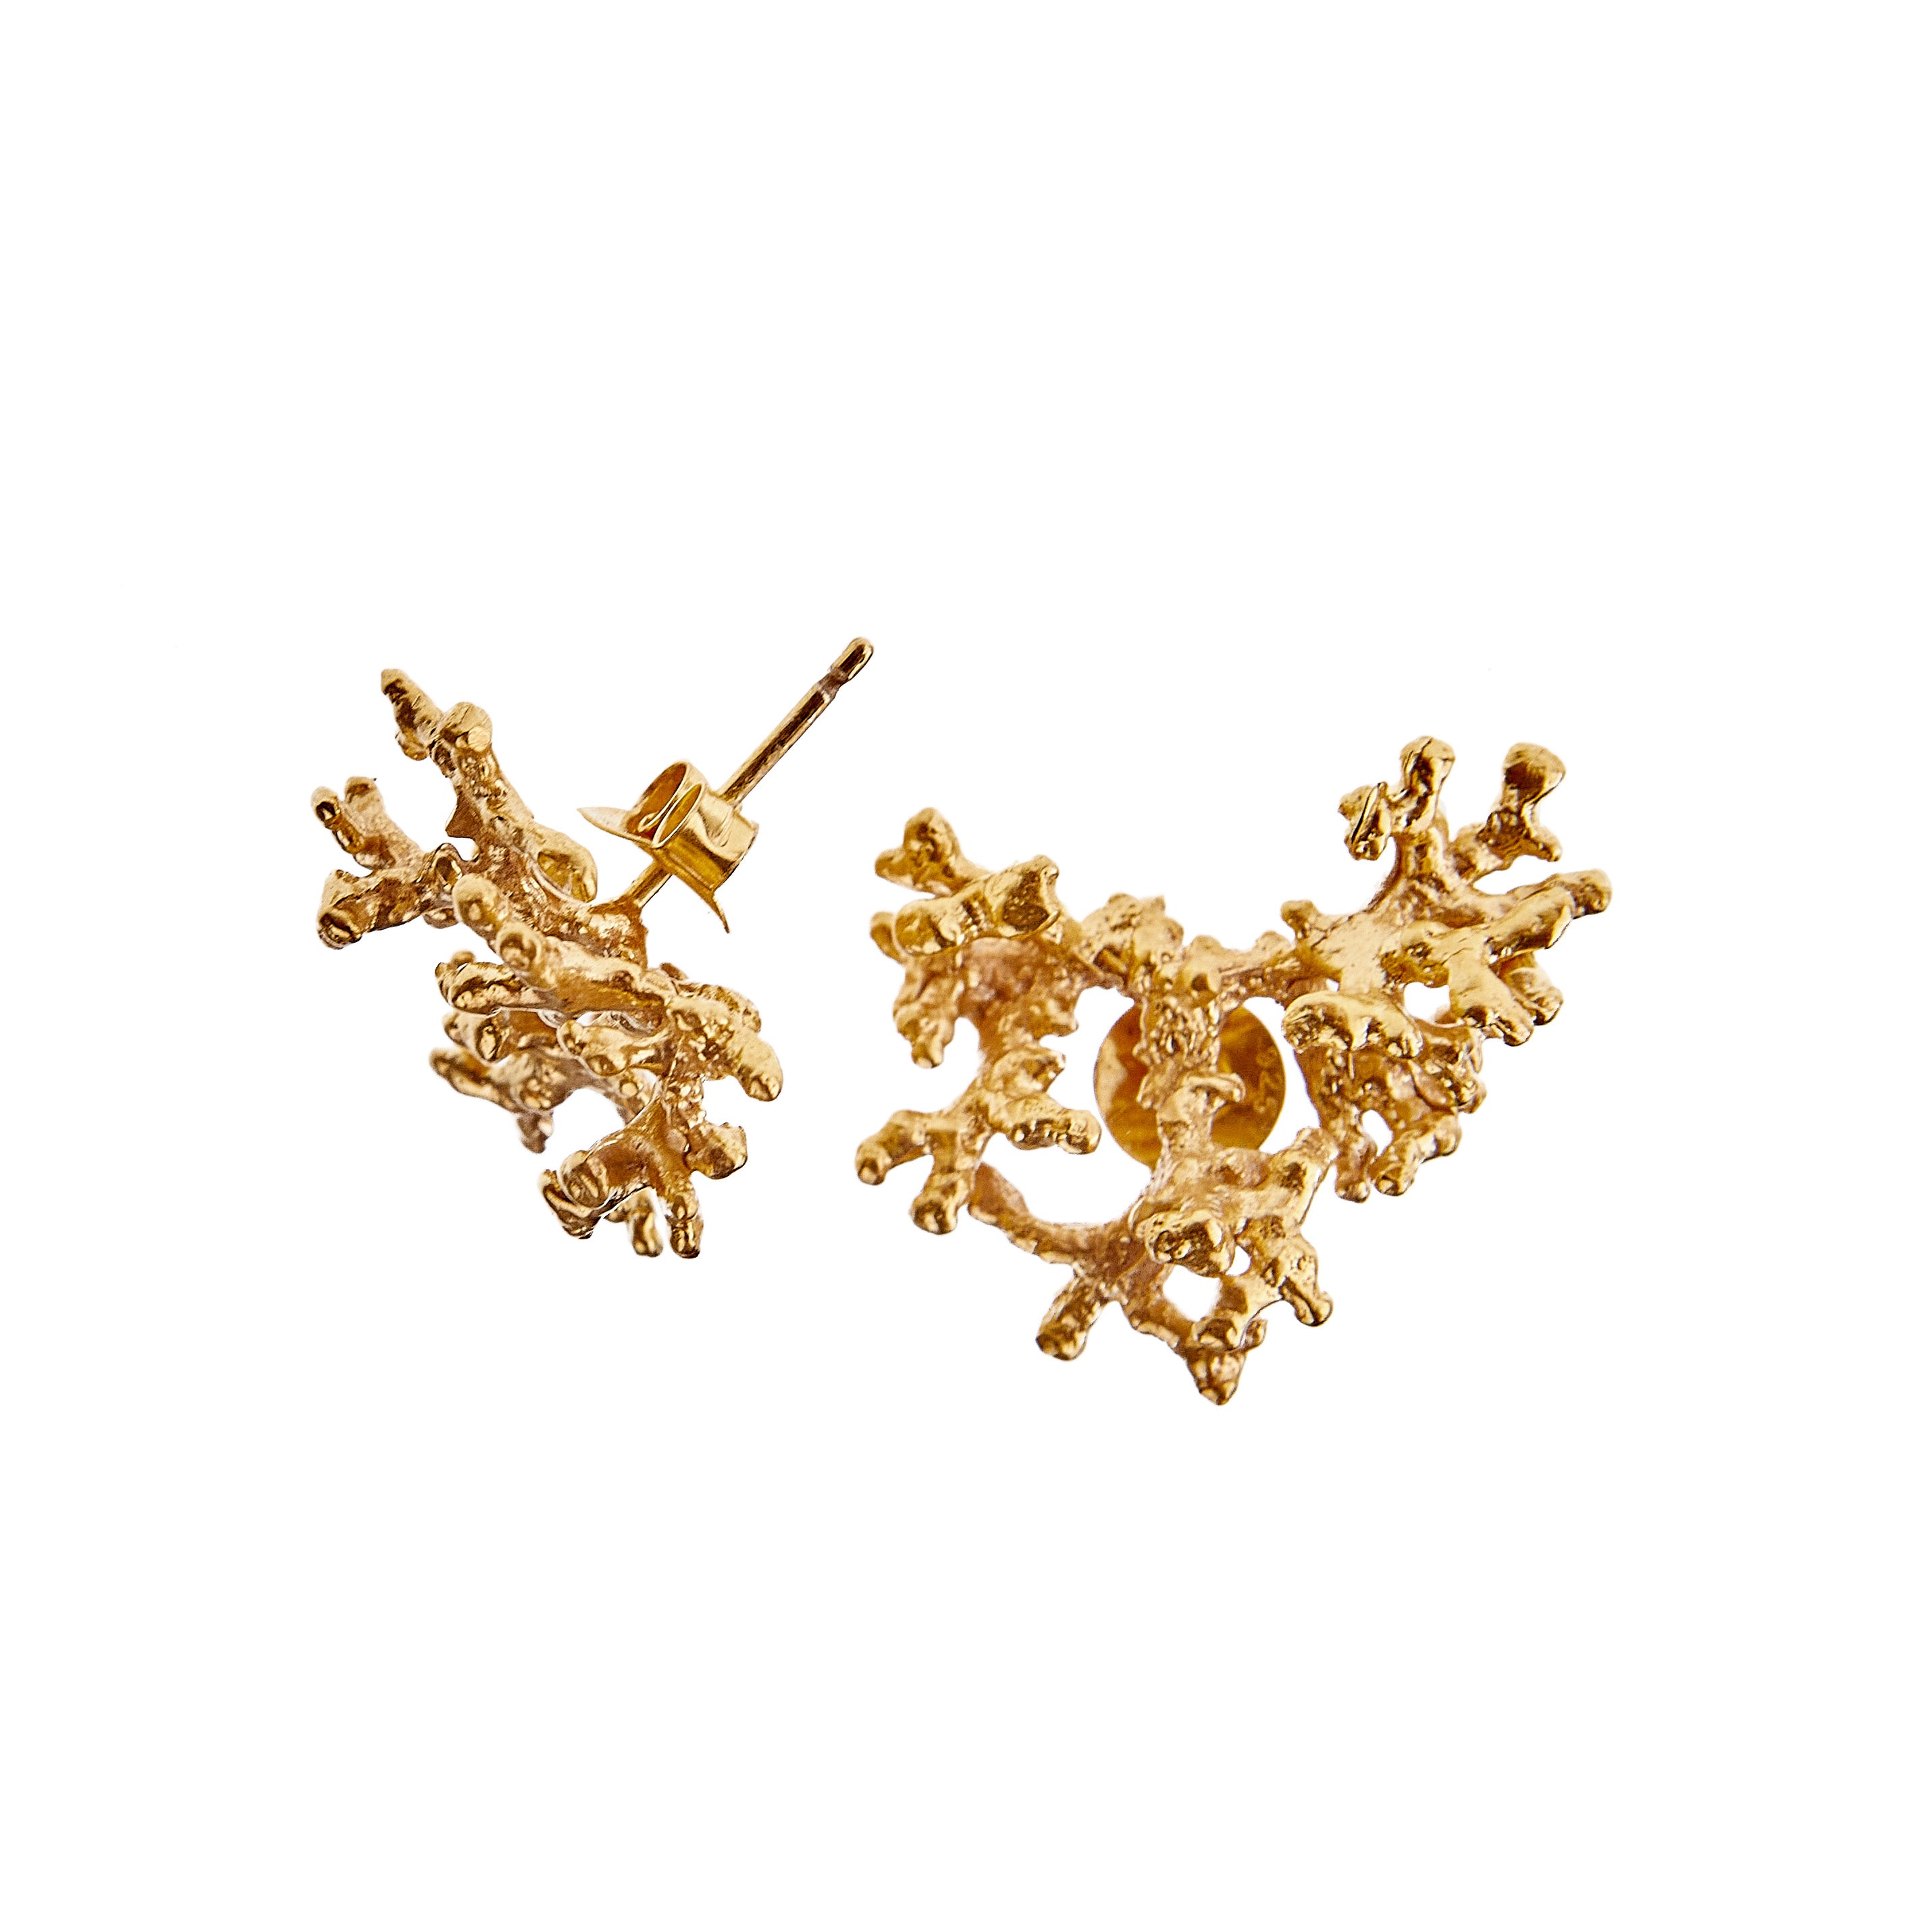 Corallia Dendros Earrings - Gold Vermeil Recycled Silver